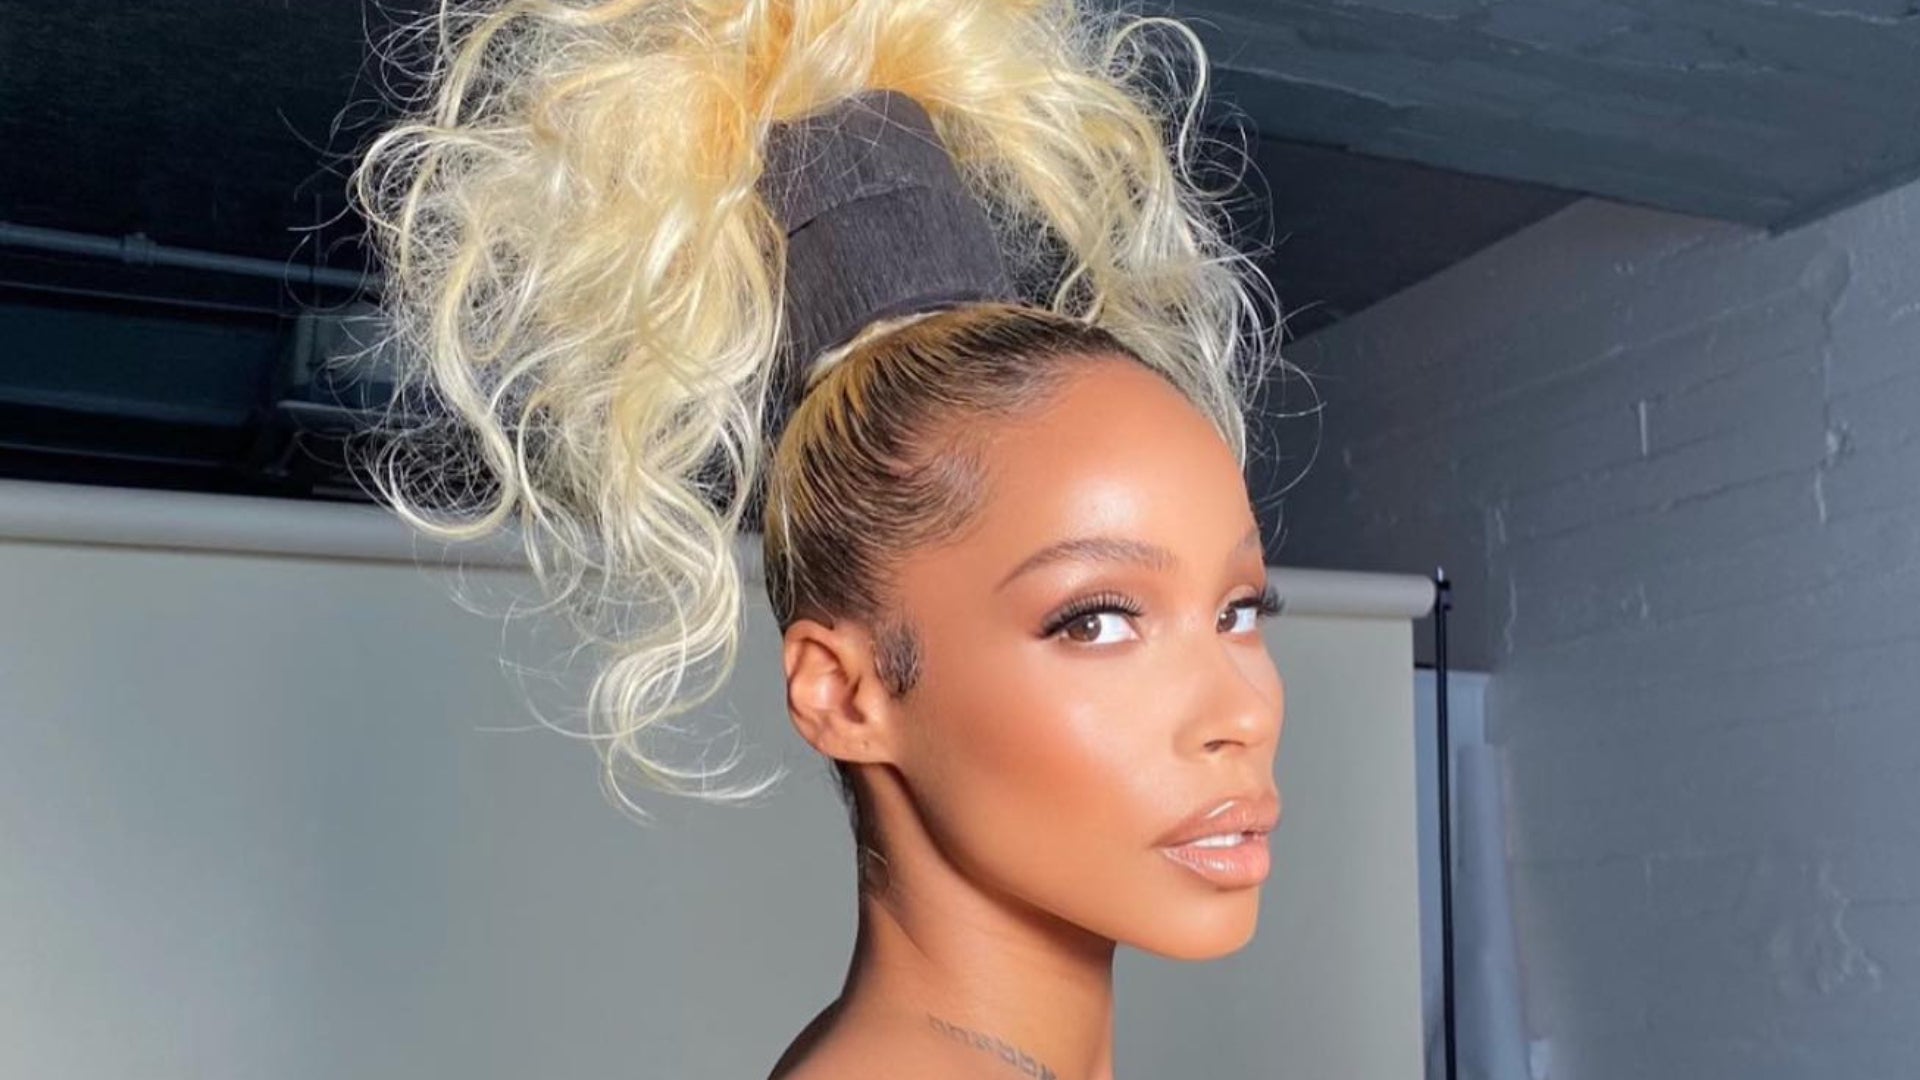 Everything You Need To Know About The Biggest Hairstyle Trends Of 2022, According To Experts